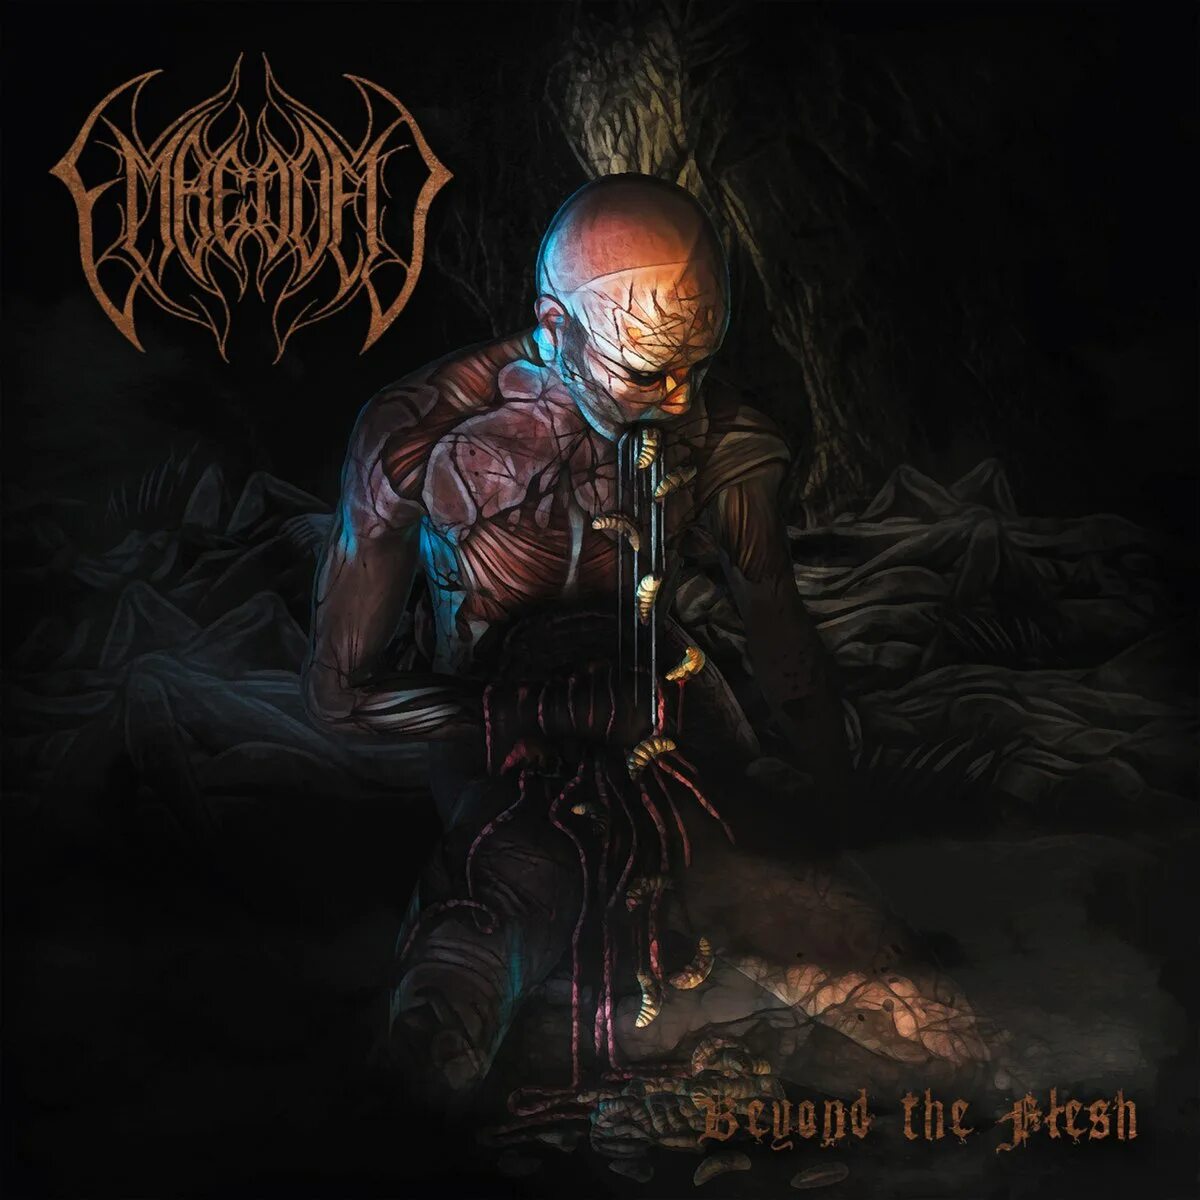 Fatal ot the flesh. Beyond the Flesh обложка. The Burial - in the taking of Flesh (2013).